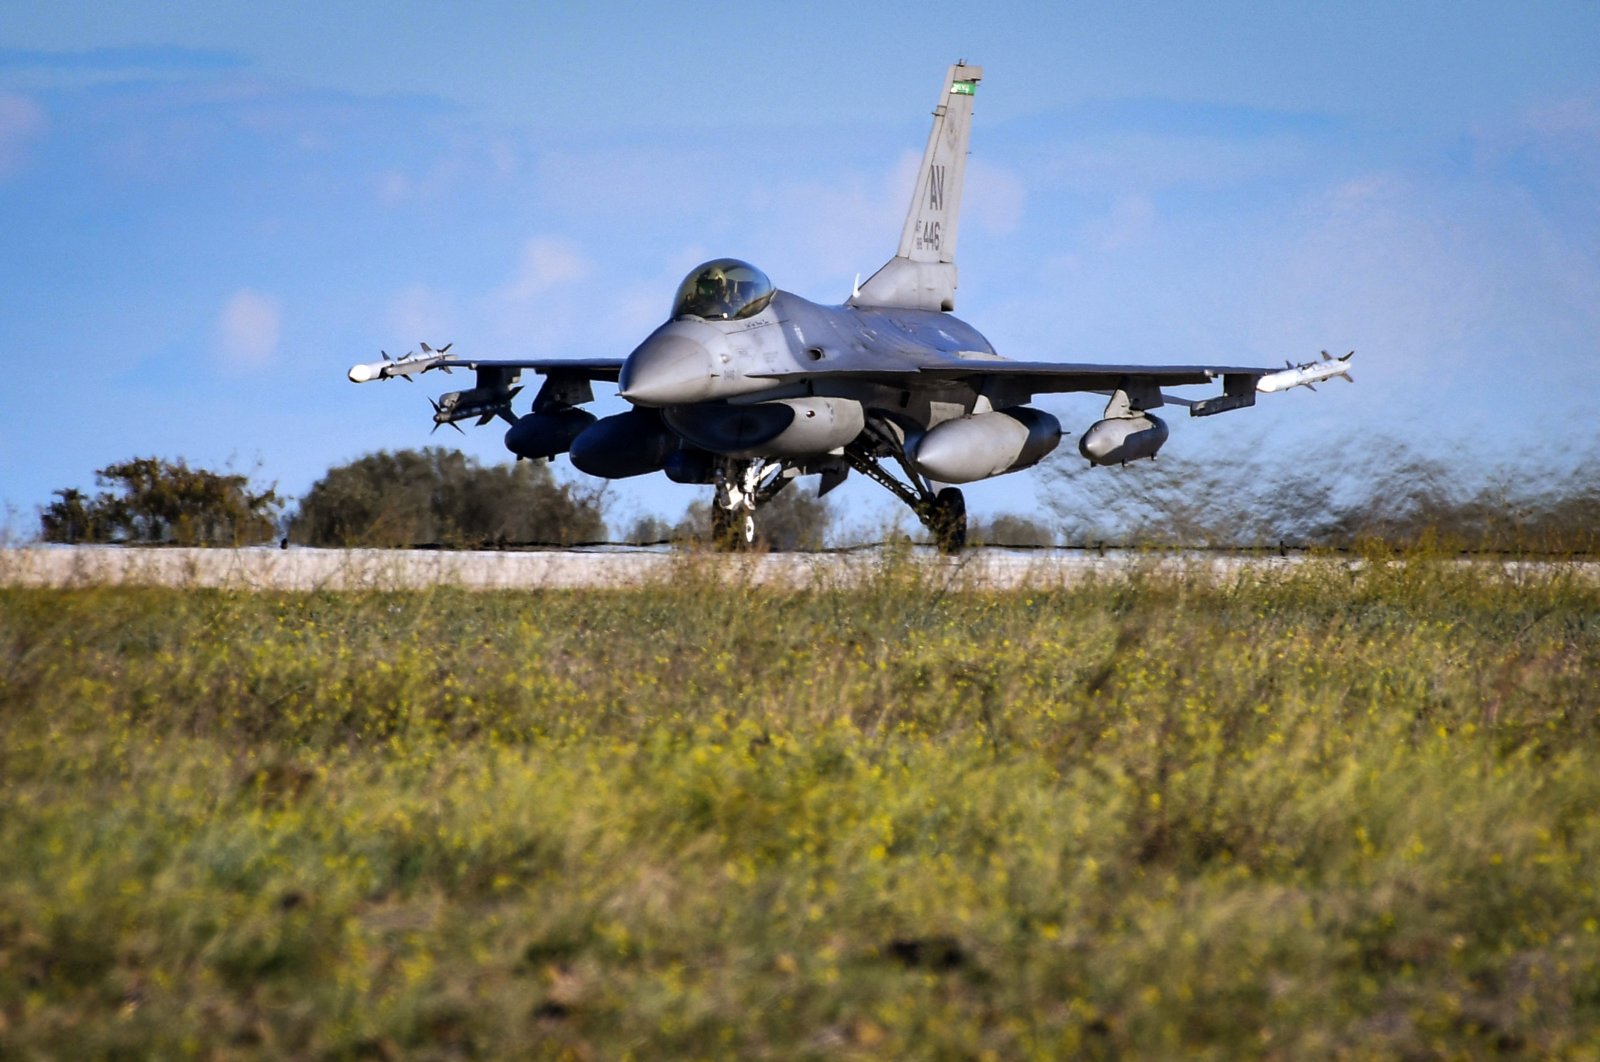 A Lockheed Martin F-16 Fighting Falcon of the U.S. Air Force takes off during the Falcon Strike 2022 military exercise in Amendola, Foggia, Italy, Nov. 21, 2022. (Reuters Photo)